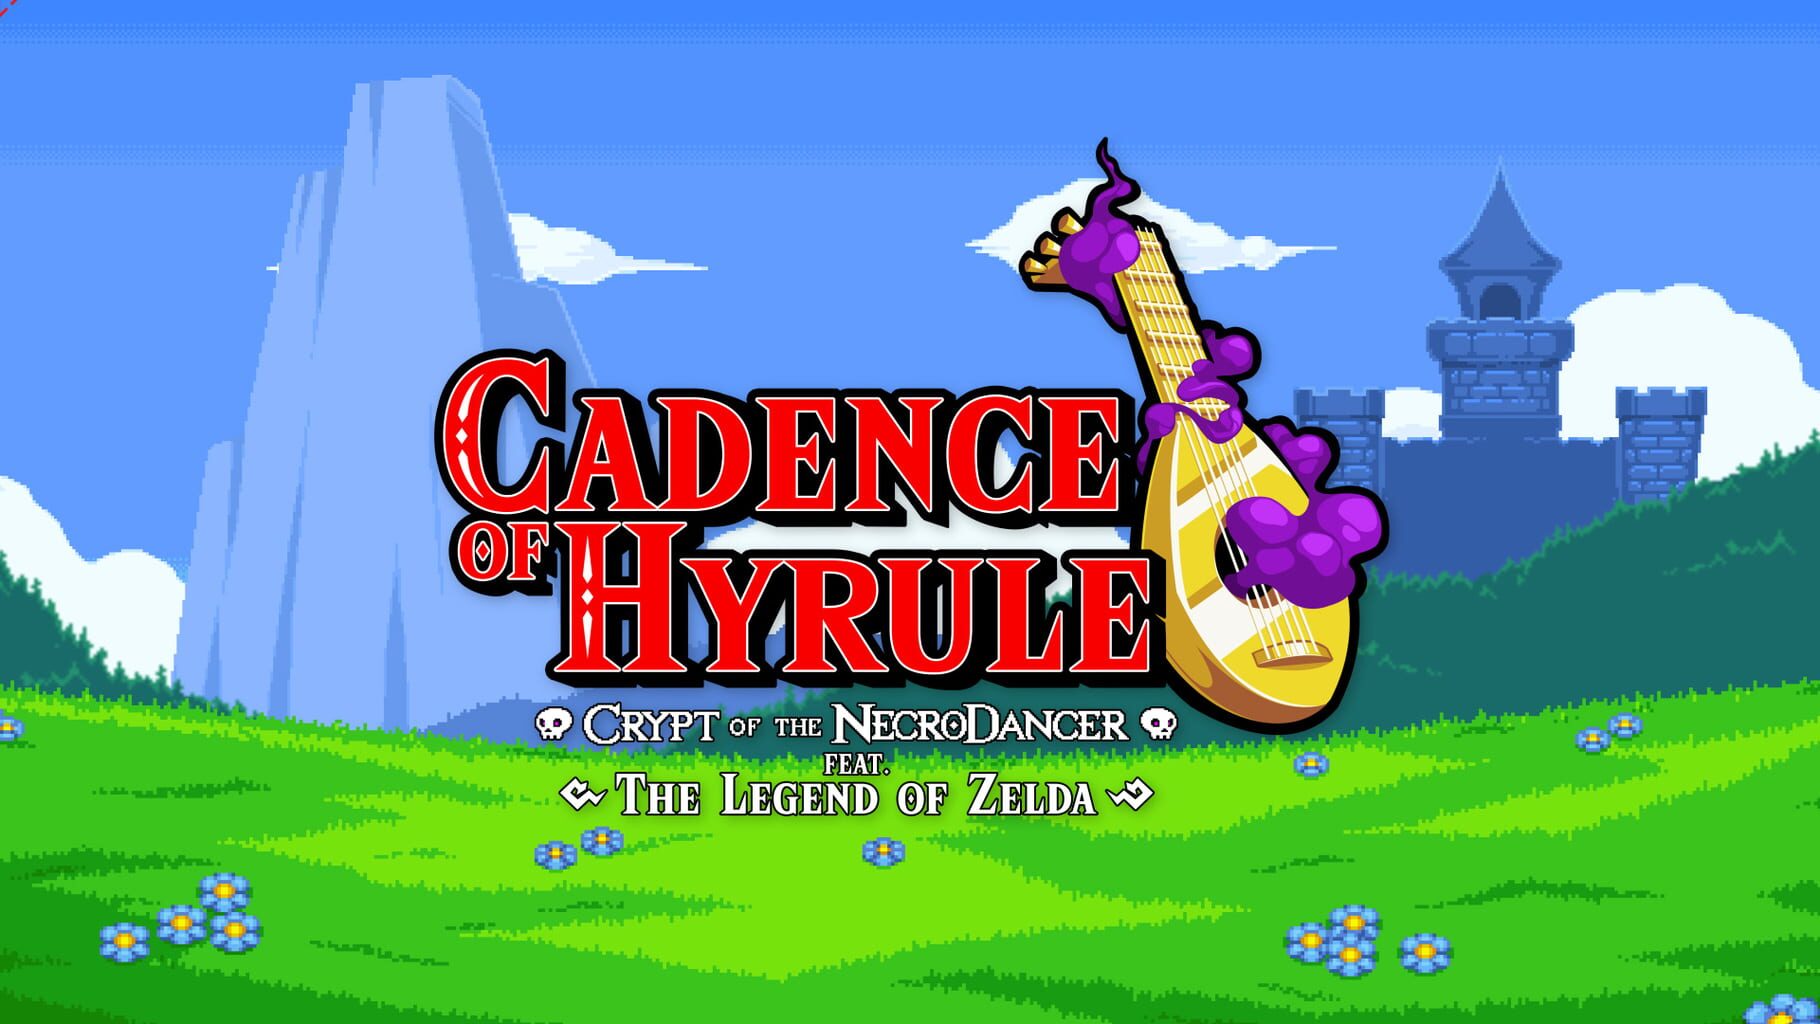 Artwork for Cadence of Hyrule: Crypt of the NecroDancer Featuring the Legend of Zelda